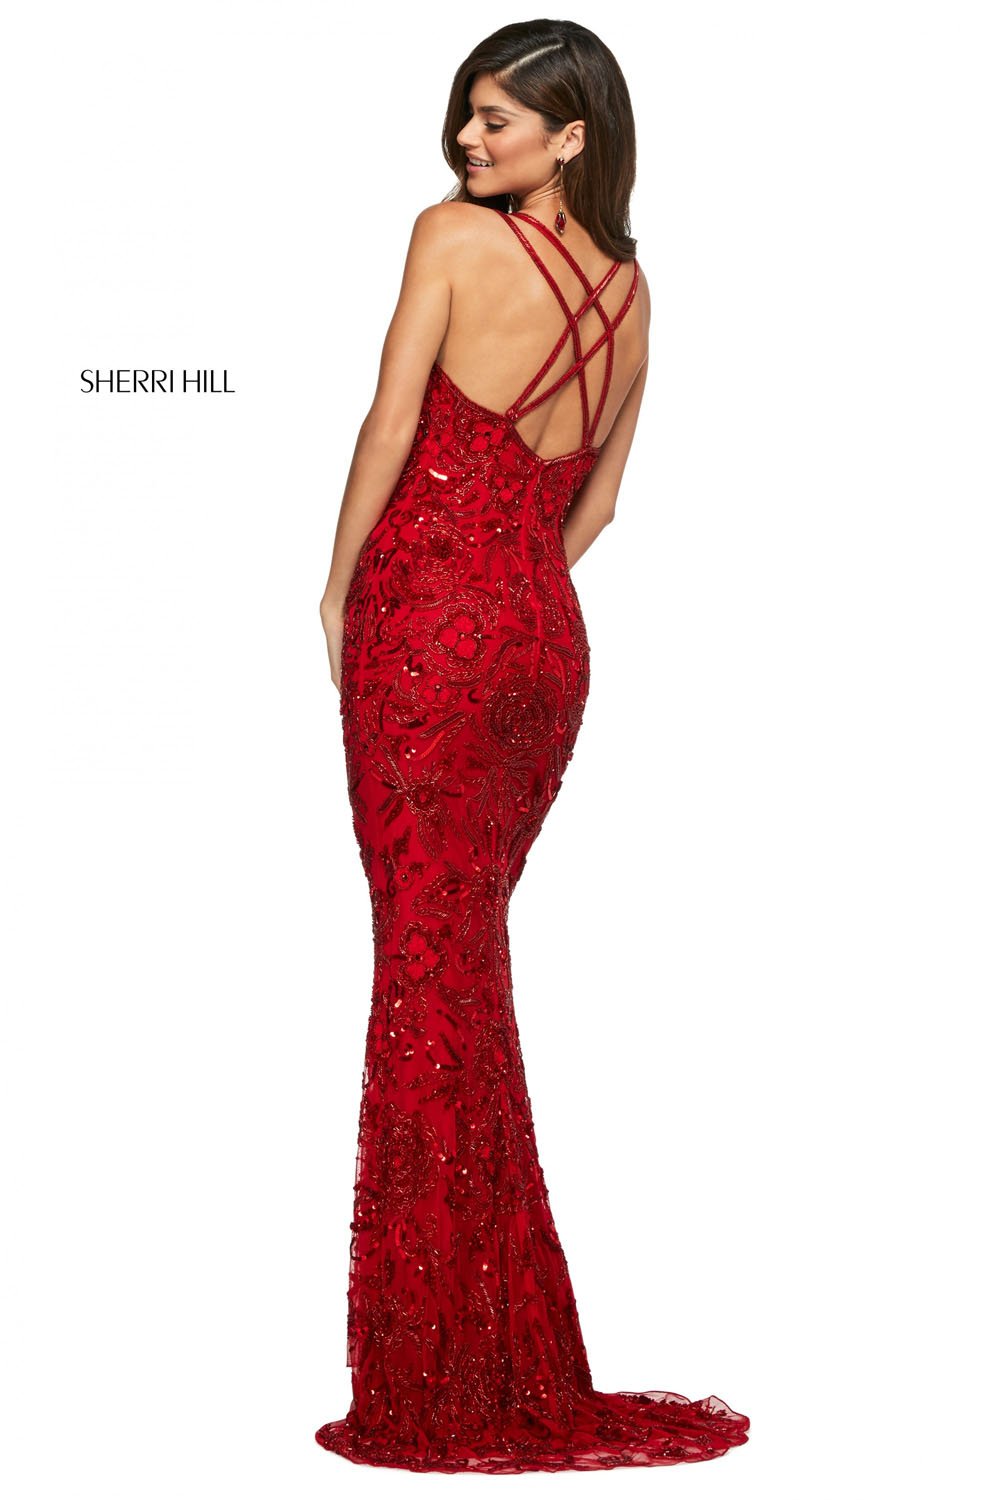 Sherri Hill 53689 dress images in these colors: Red, Black.